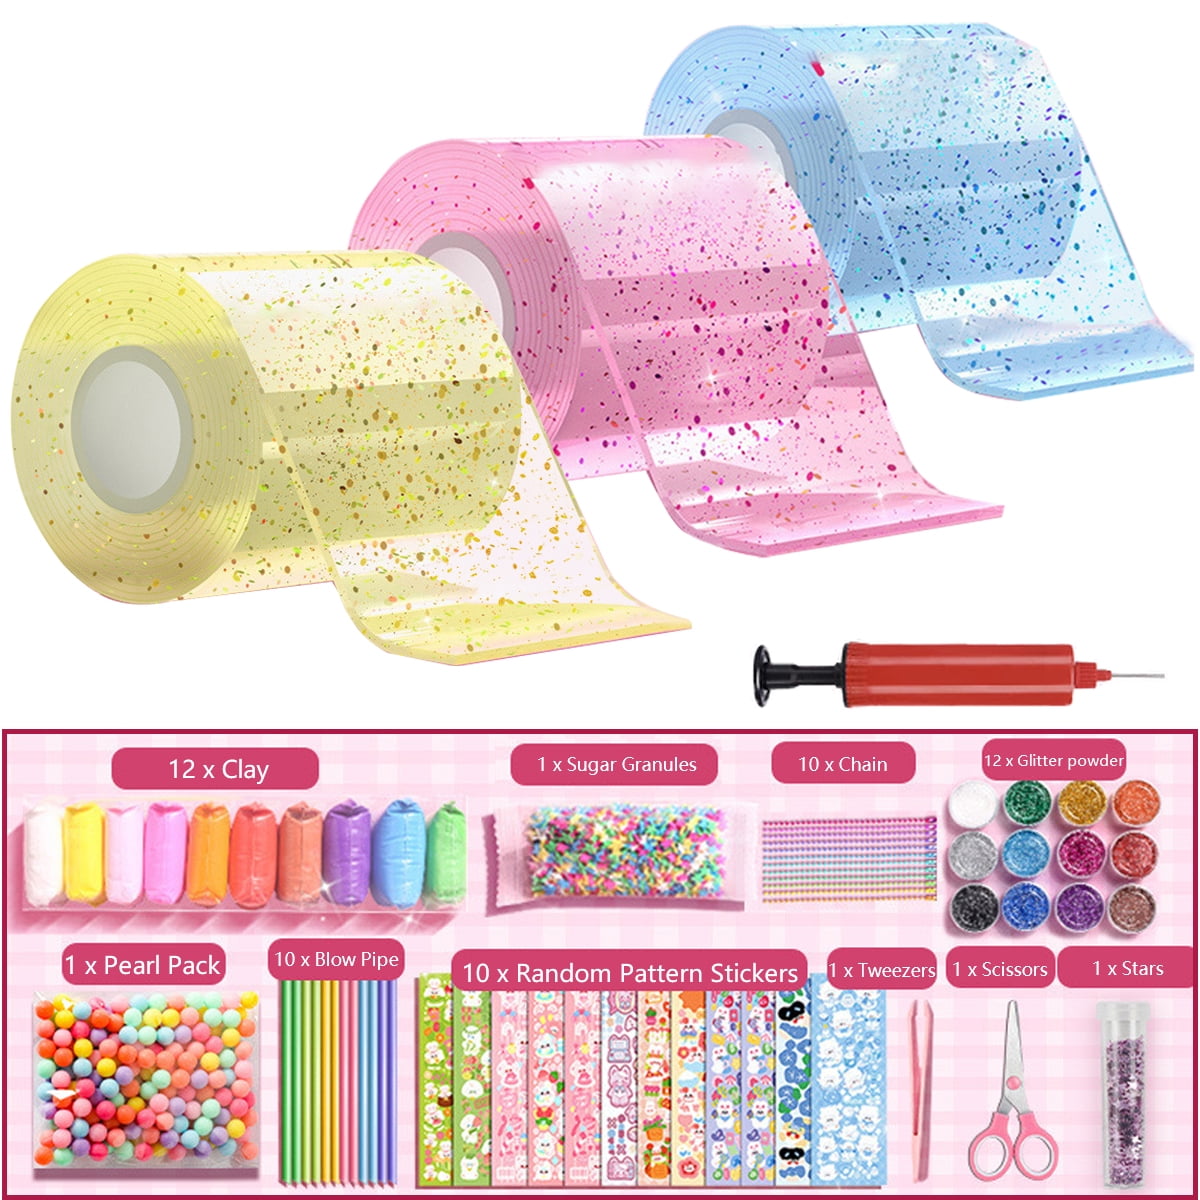 Nano Double Tape Bubbles Kit,Double Sided Tape,Plastic Bubbles with 10  Straws and 12 Packs Glitter,Nano Tape Elastic Bubble Squishy DIY Kit,Party